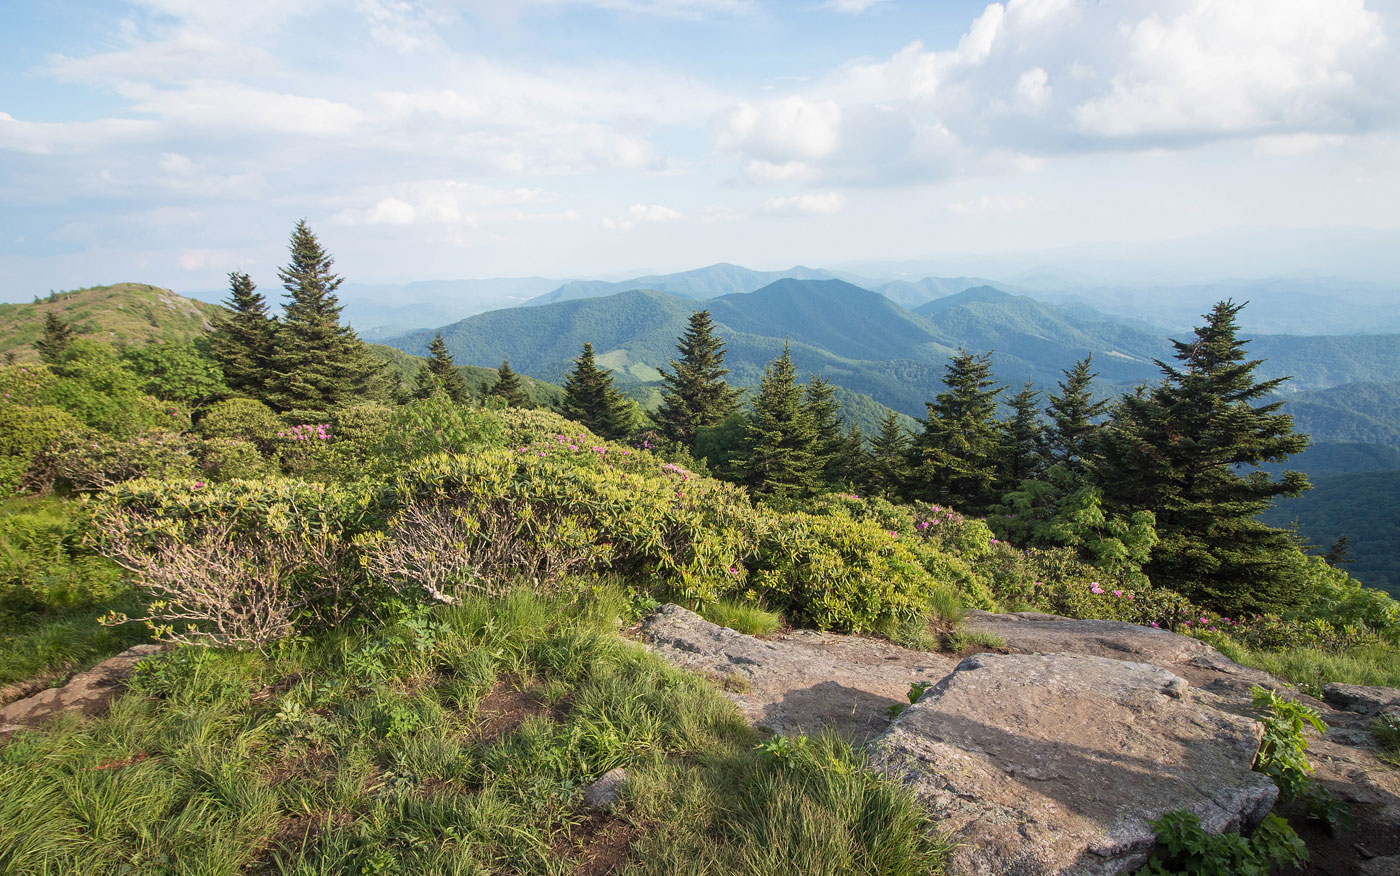 Hike Roan High Knob and Grassy Ridge Bald in Pisgah National Forest, North Carolina - Stav is Lost